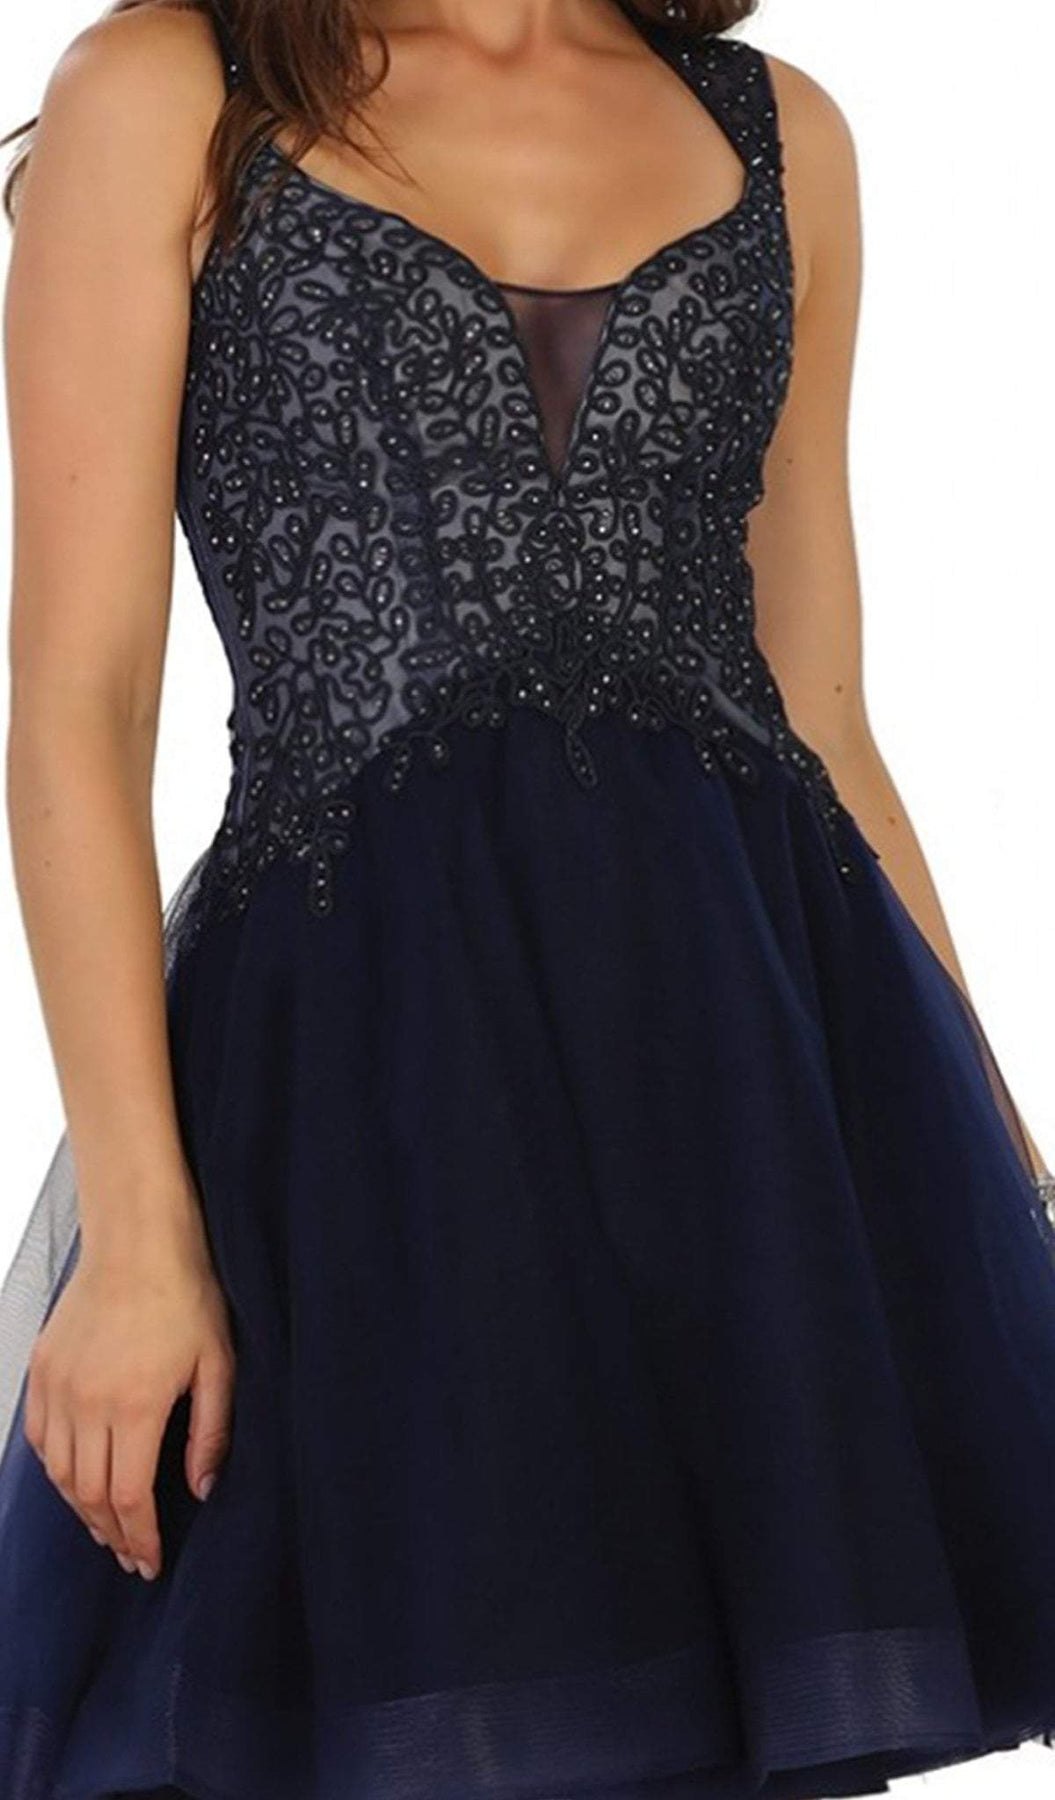 May Queen - MQ1532 Jeweled A-line Cocktail Dress